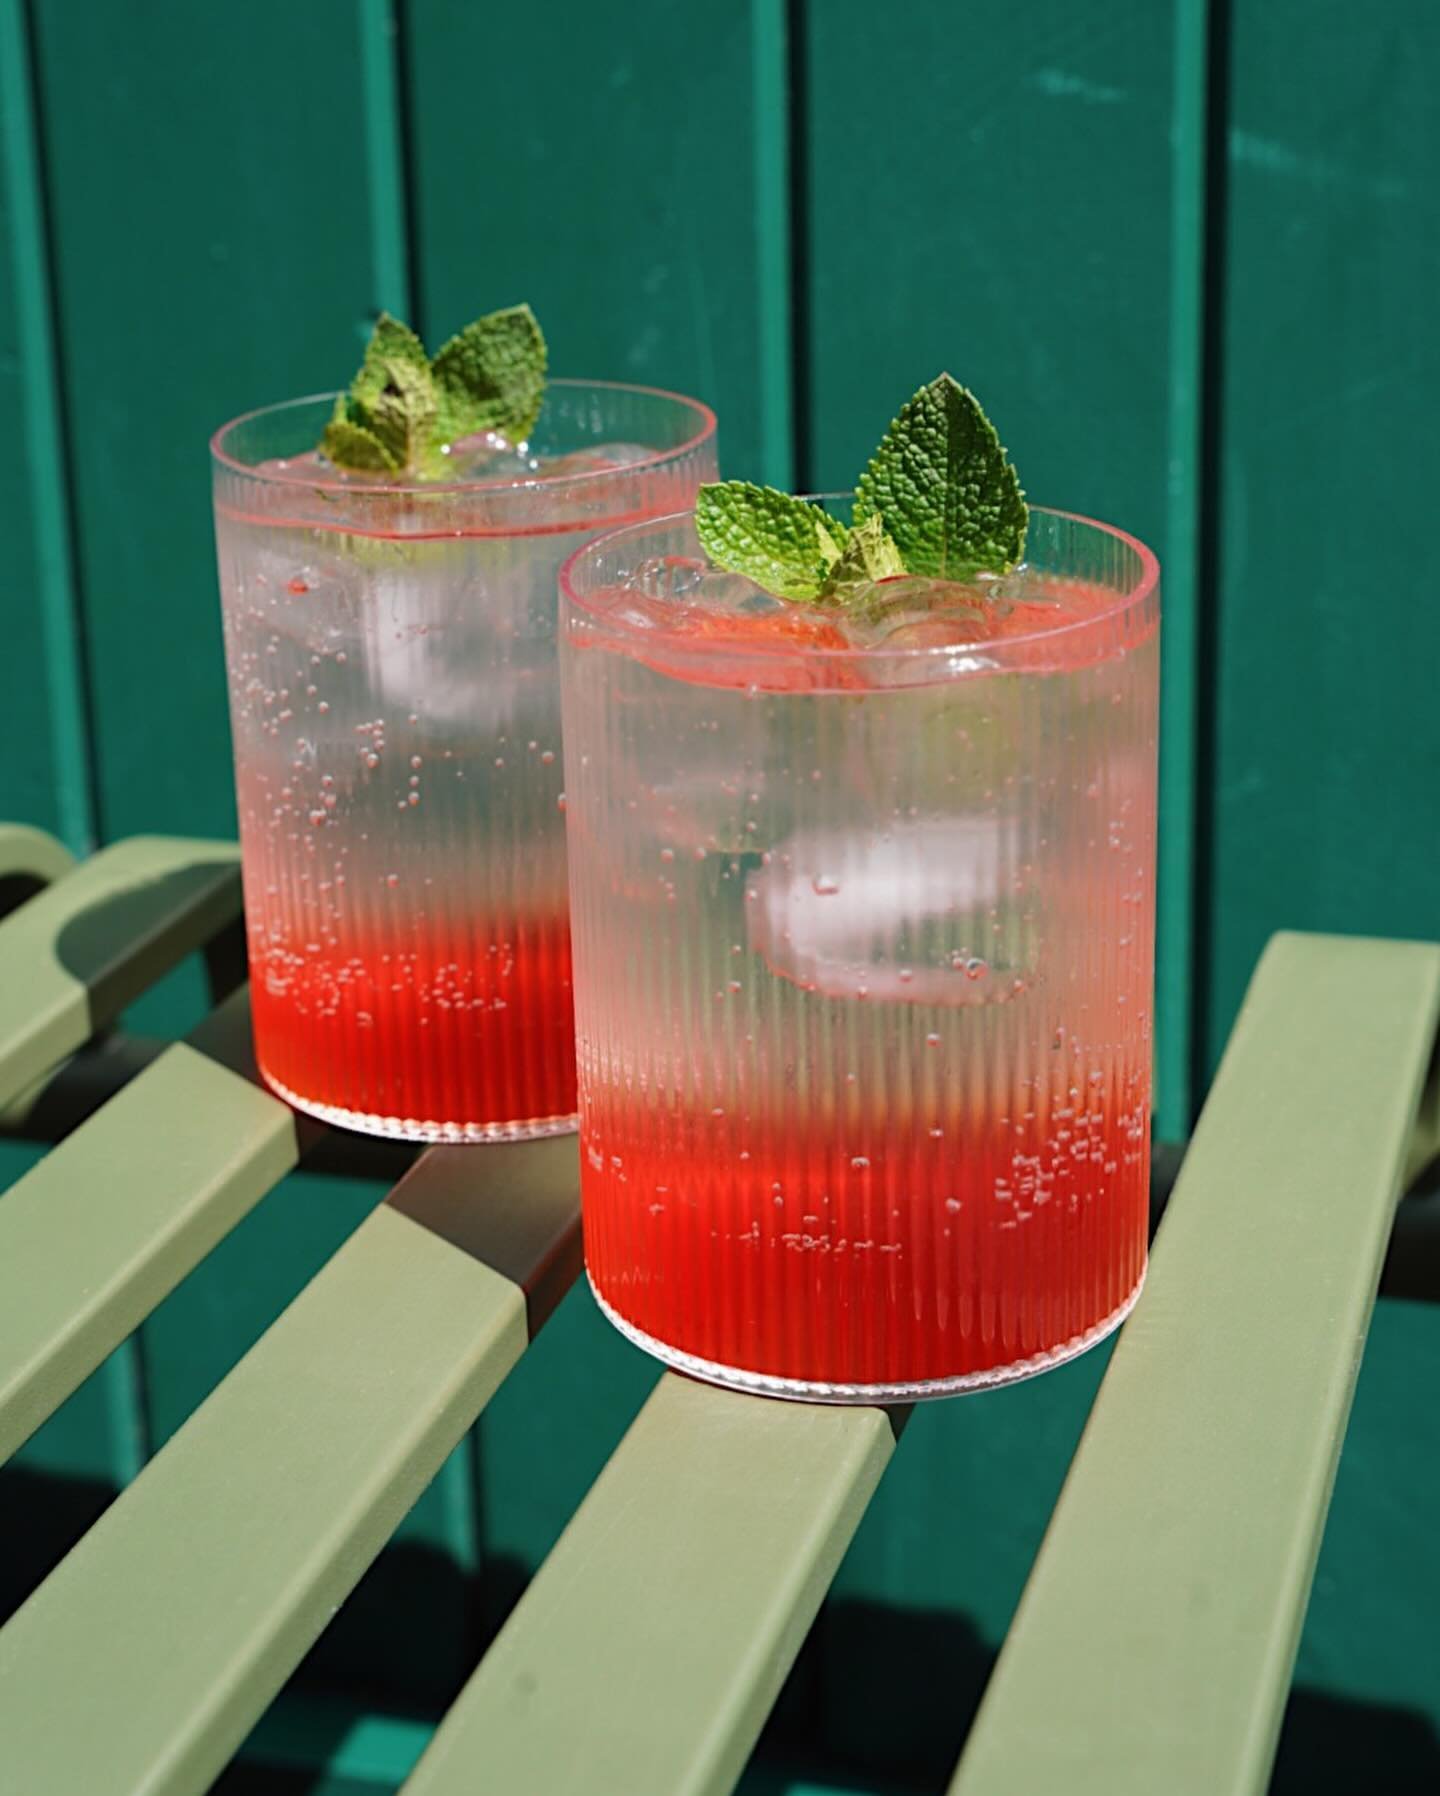 Summer Soda - Sparkling soda made with housemade fresh Strawberry &amp; Lime cordial served with mint garnish🍓🍋&zwj;🟩